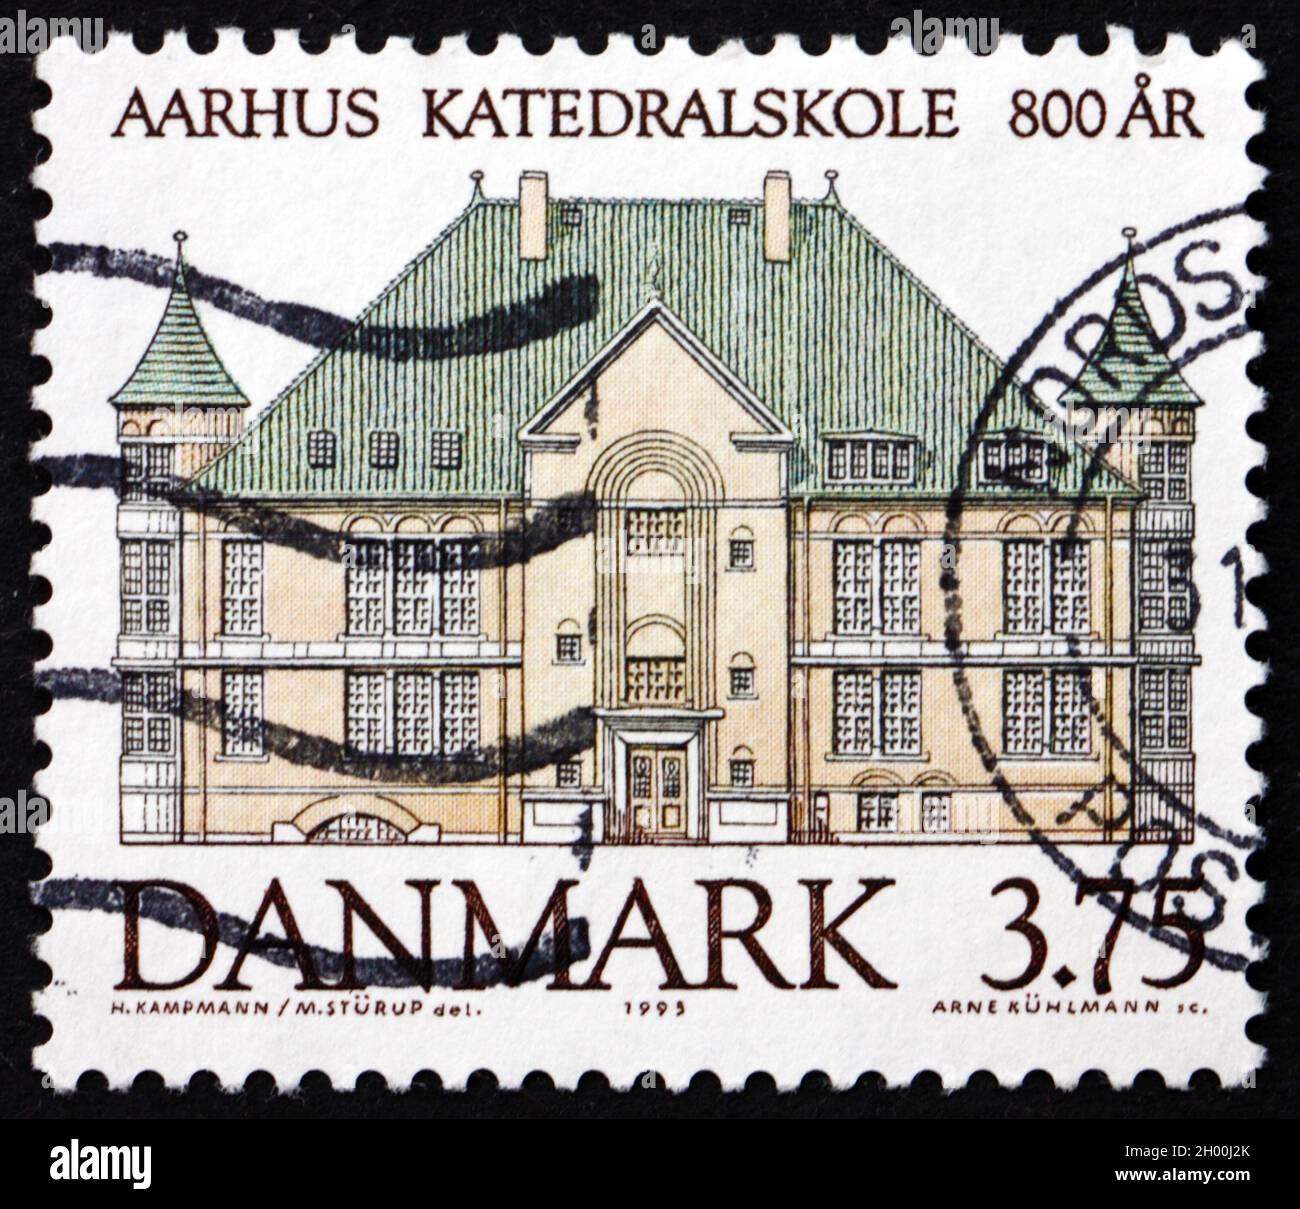 DENMARK - CIRCA 1995: a stamp printed in Denmark shows Aarhus Cathedral  School, 800th Anniversary, circa 1995 Stock Photo - Alamy